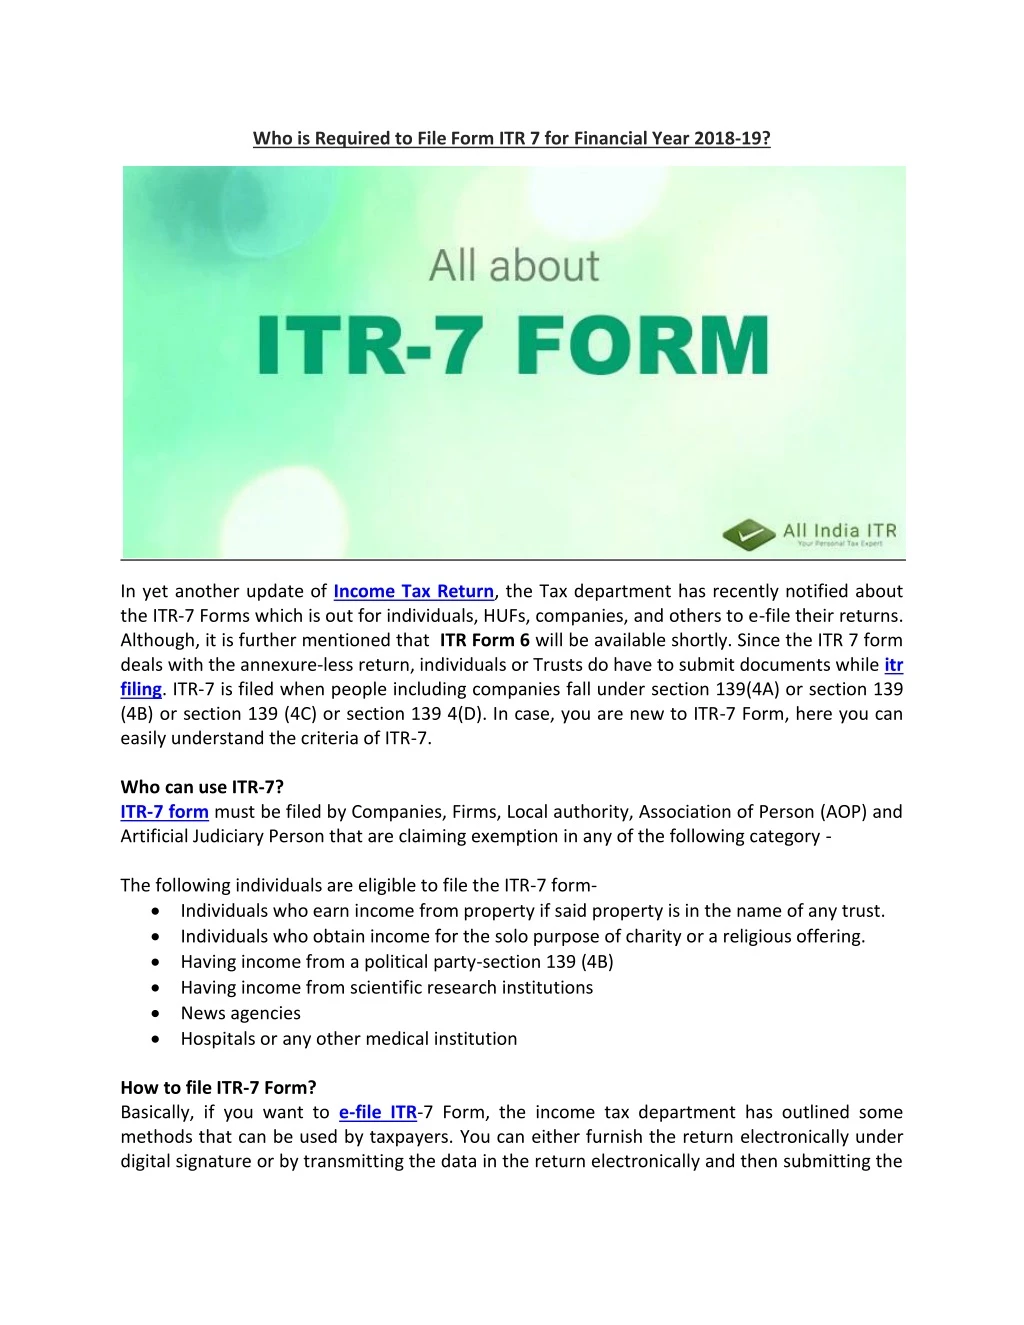 who is required to file form itr 7 for financial